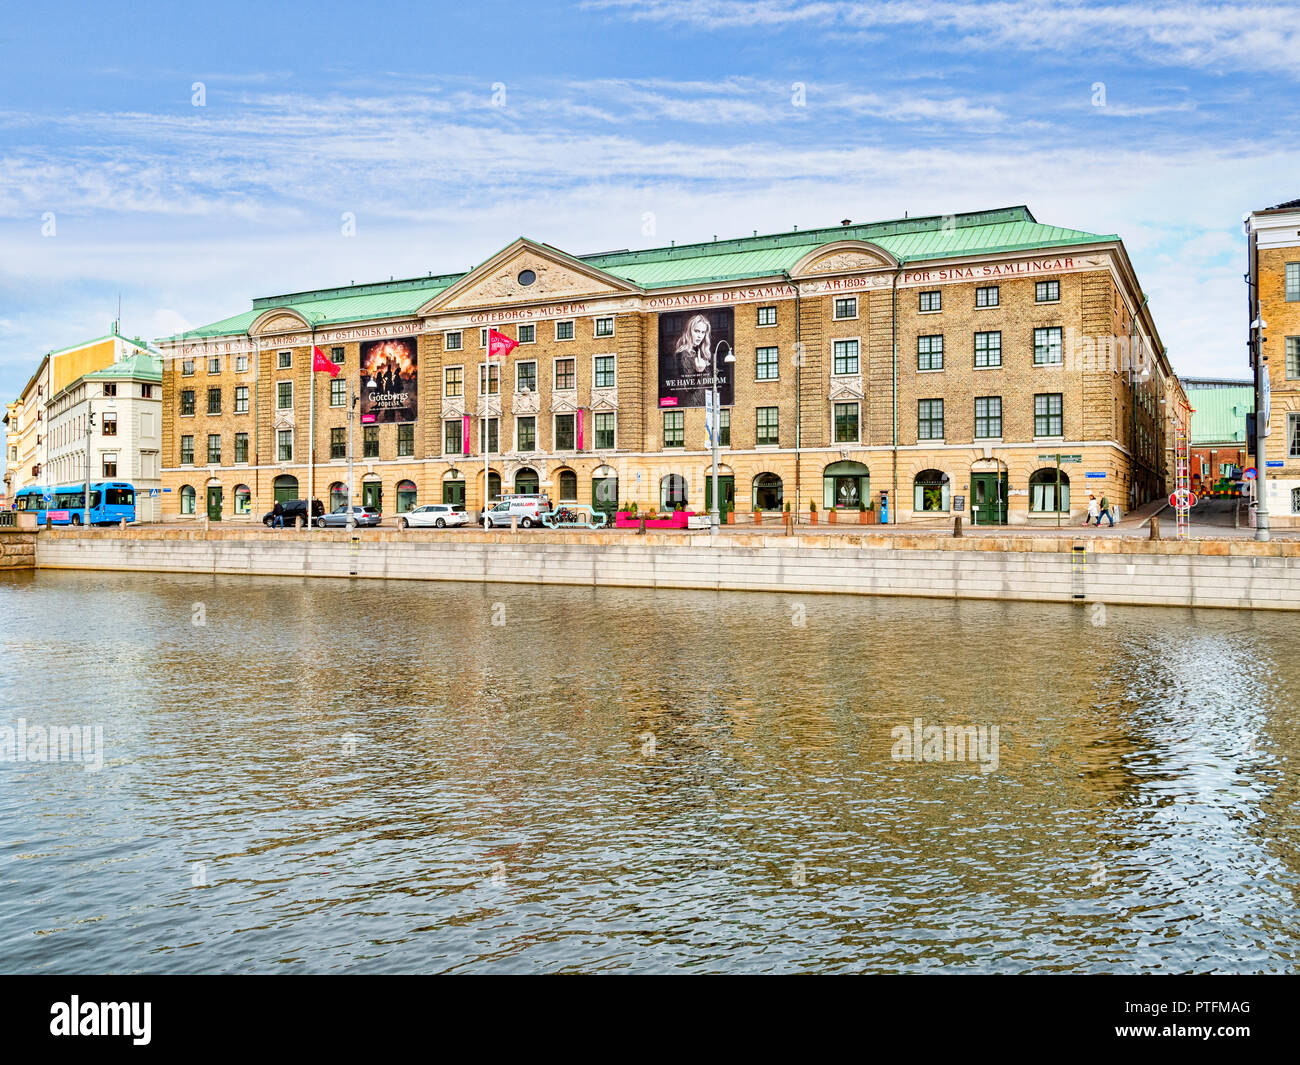 14 September 2018: Gothenburg, Sweden - The Gothenburg City Museum beside the Stora Hamn Canal, ia a museum of Swedish cultural history, from the time Stock Photo